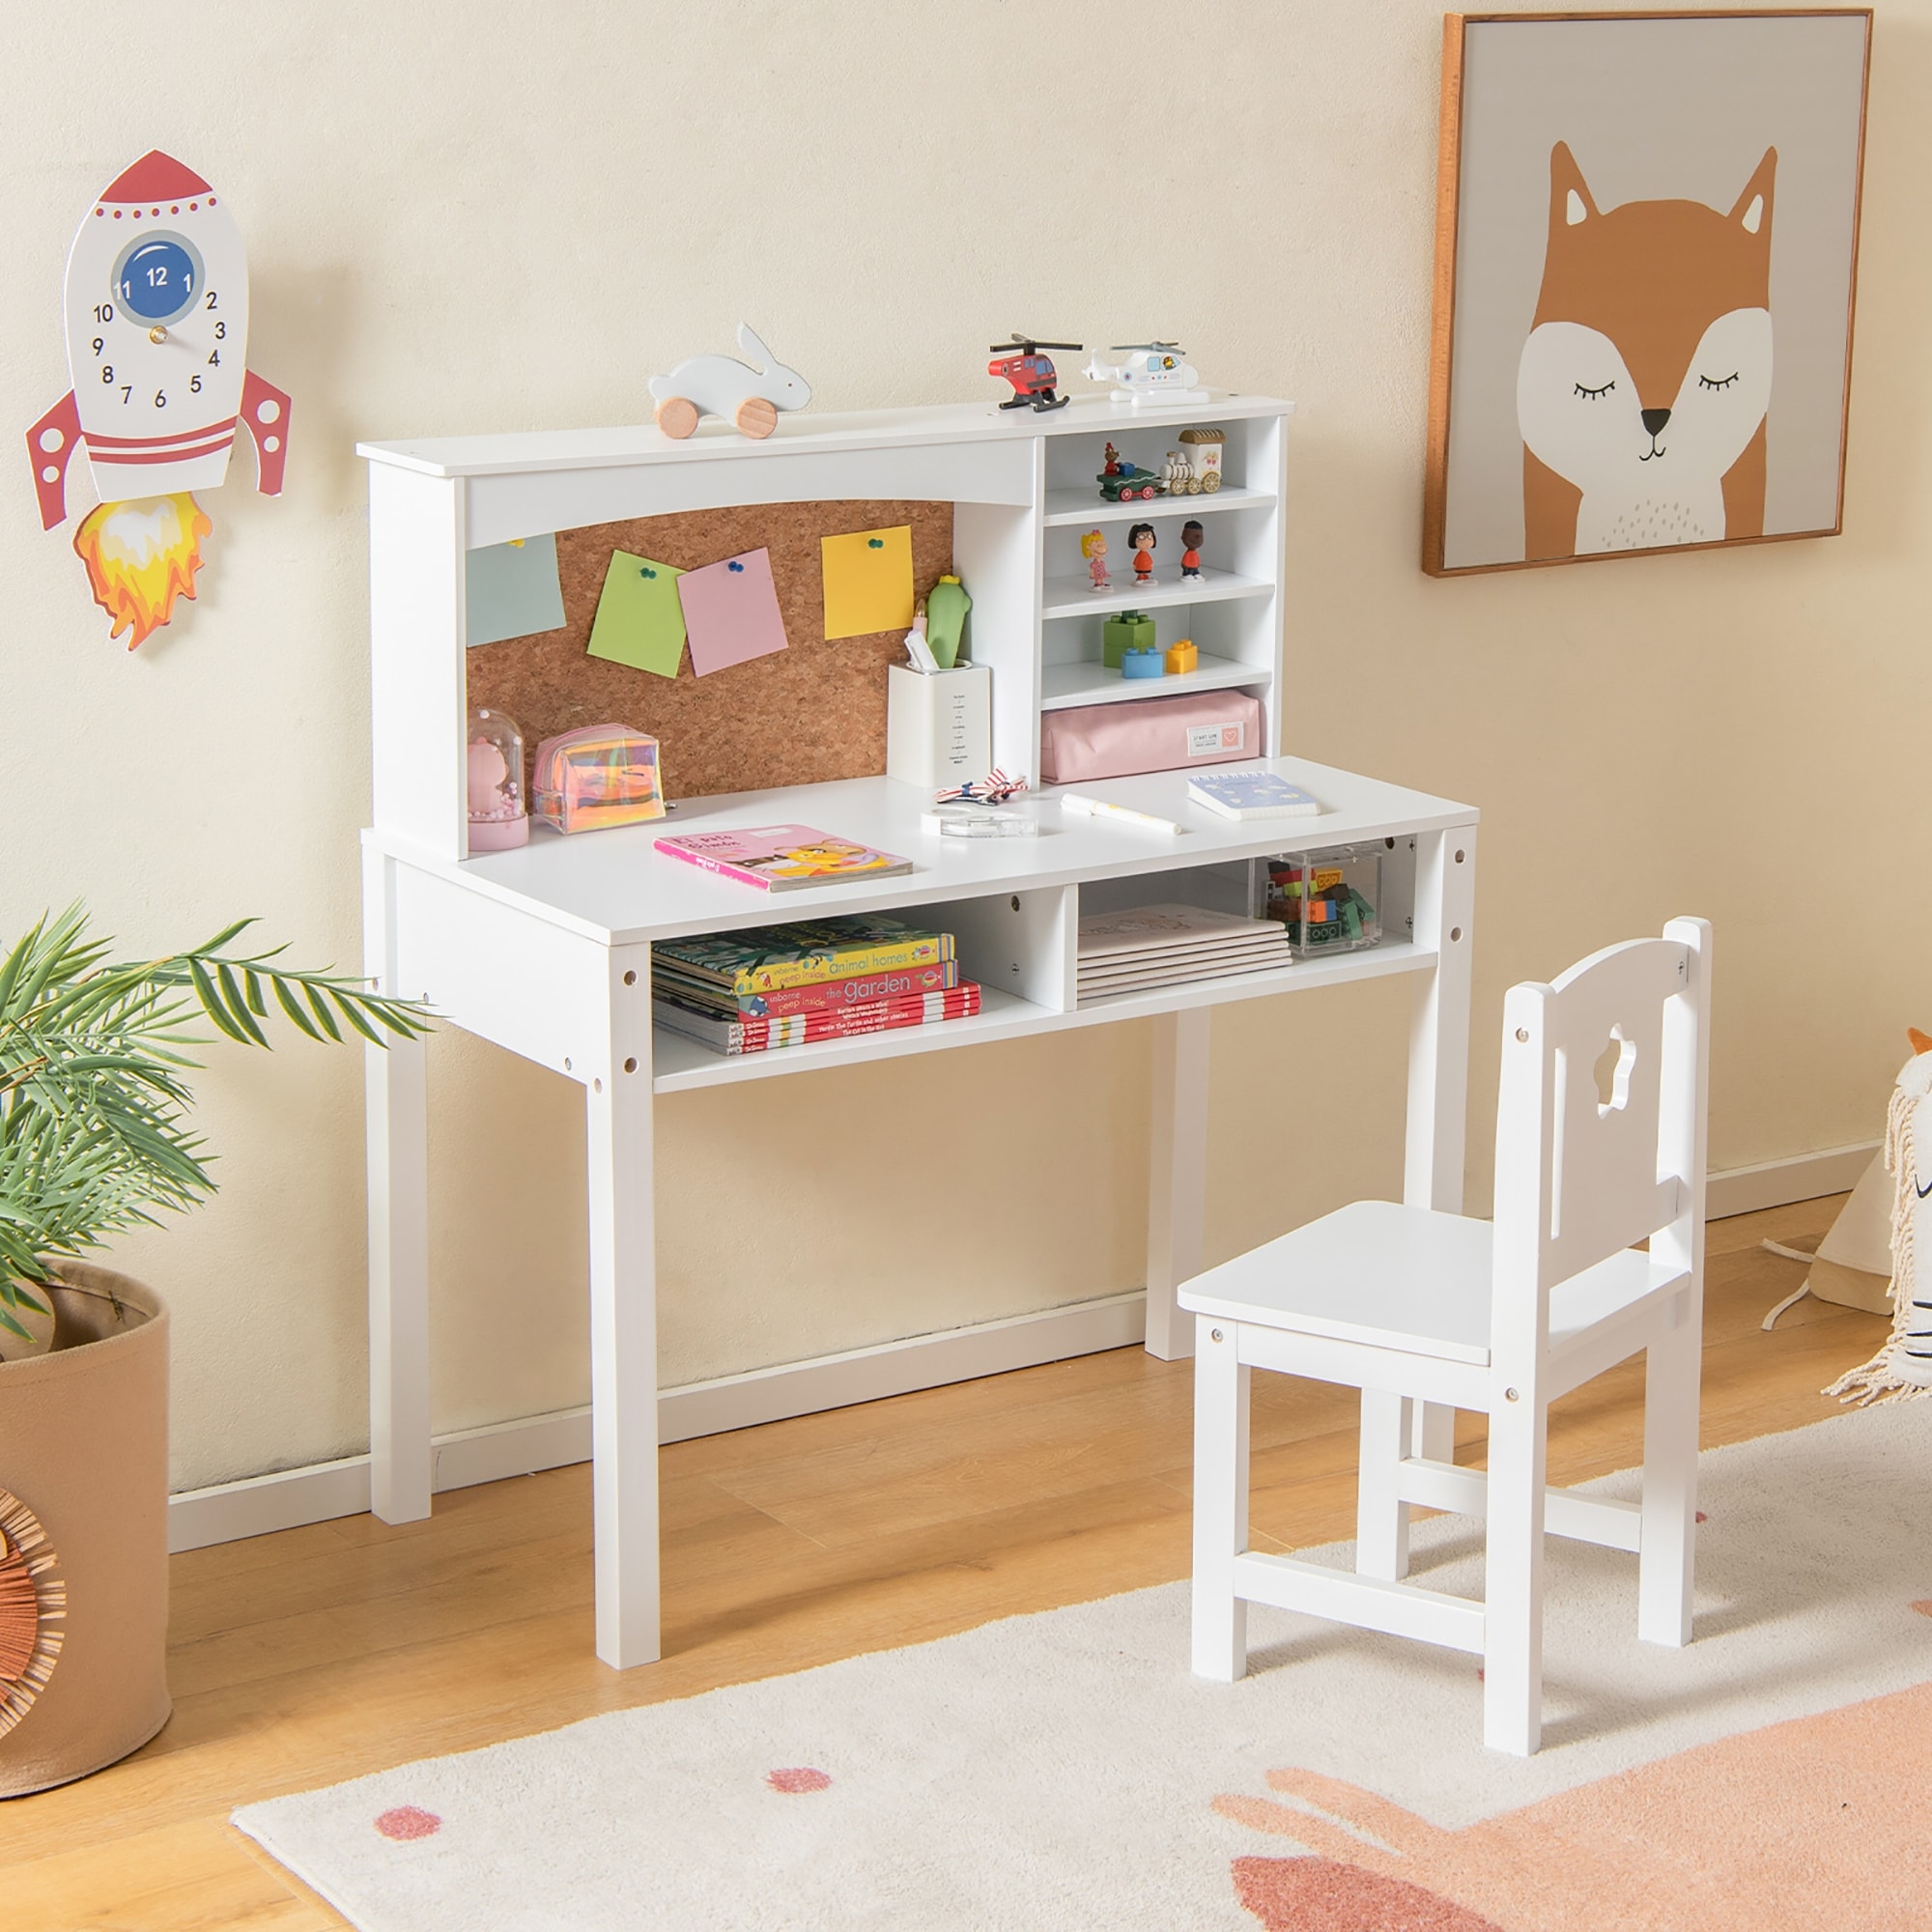 https://ak1.ostkcdn.com/images/products/is/images/direct/d5f38cb4651955be4d6206b21f612b3129a9a44c/Costway-Kids-Desk-and-Chair-Set-Study-Writing-Workstation-with-Hutch-%26.jpg